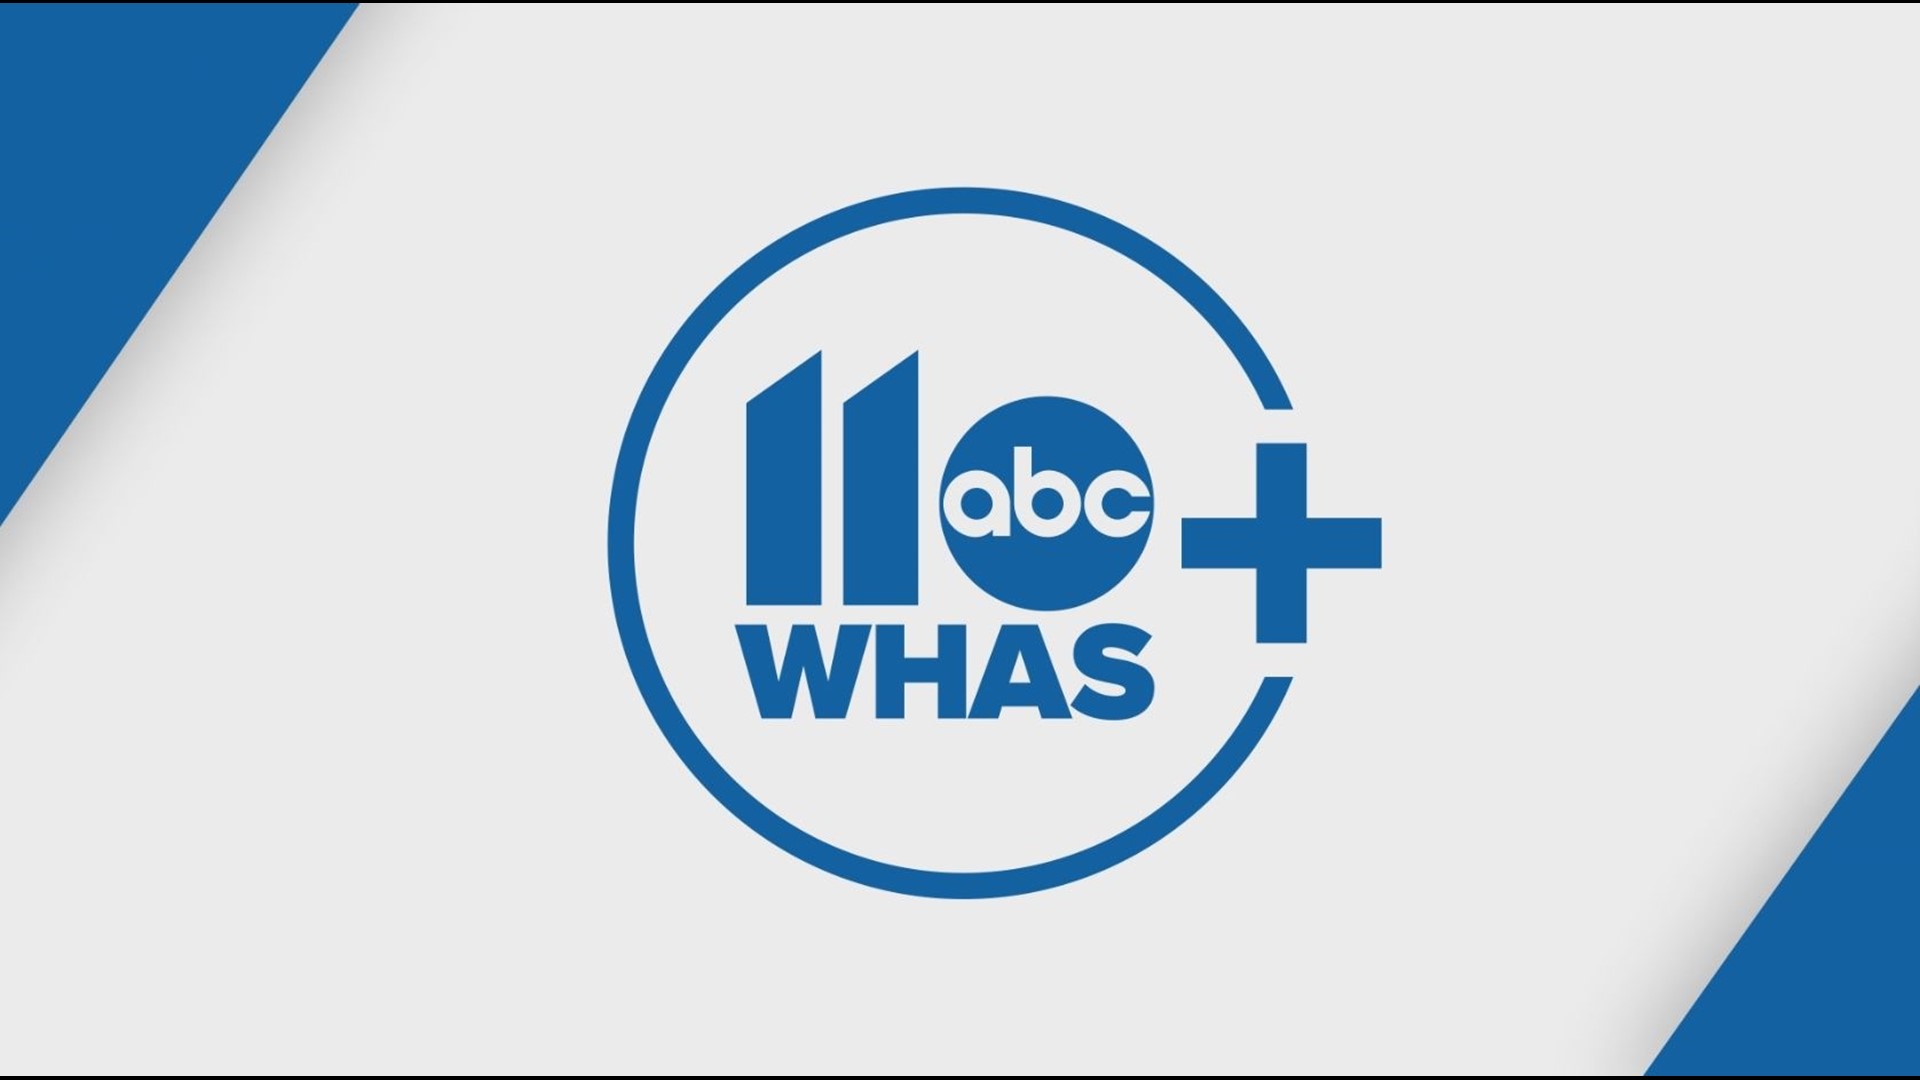 Stay up-to-date with the latest news and weather in Kentucky and southern Indiana on the all-new WHAS11+ app.